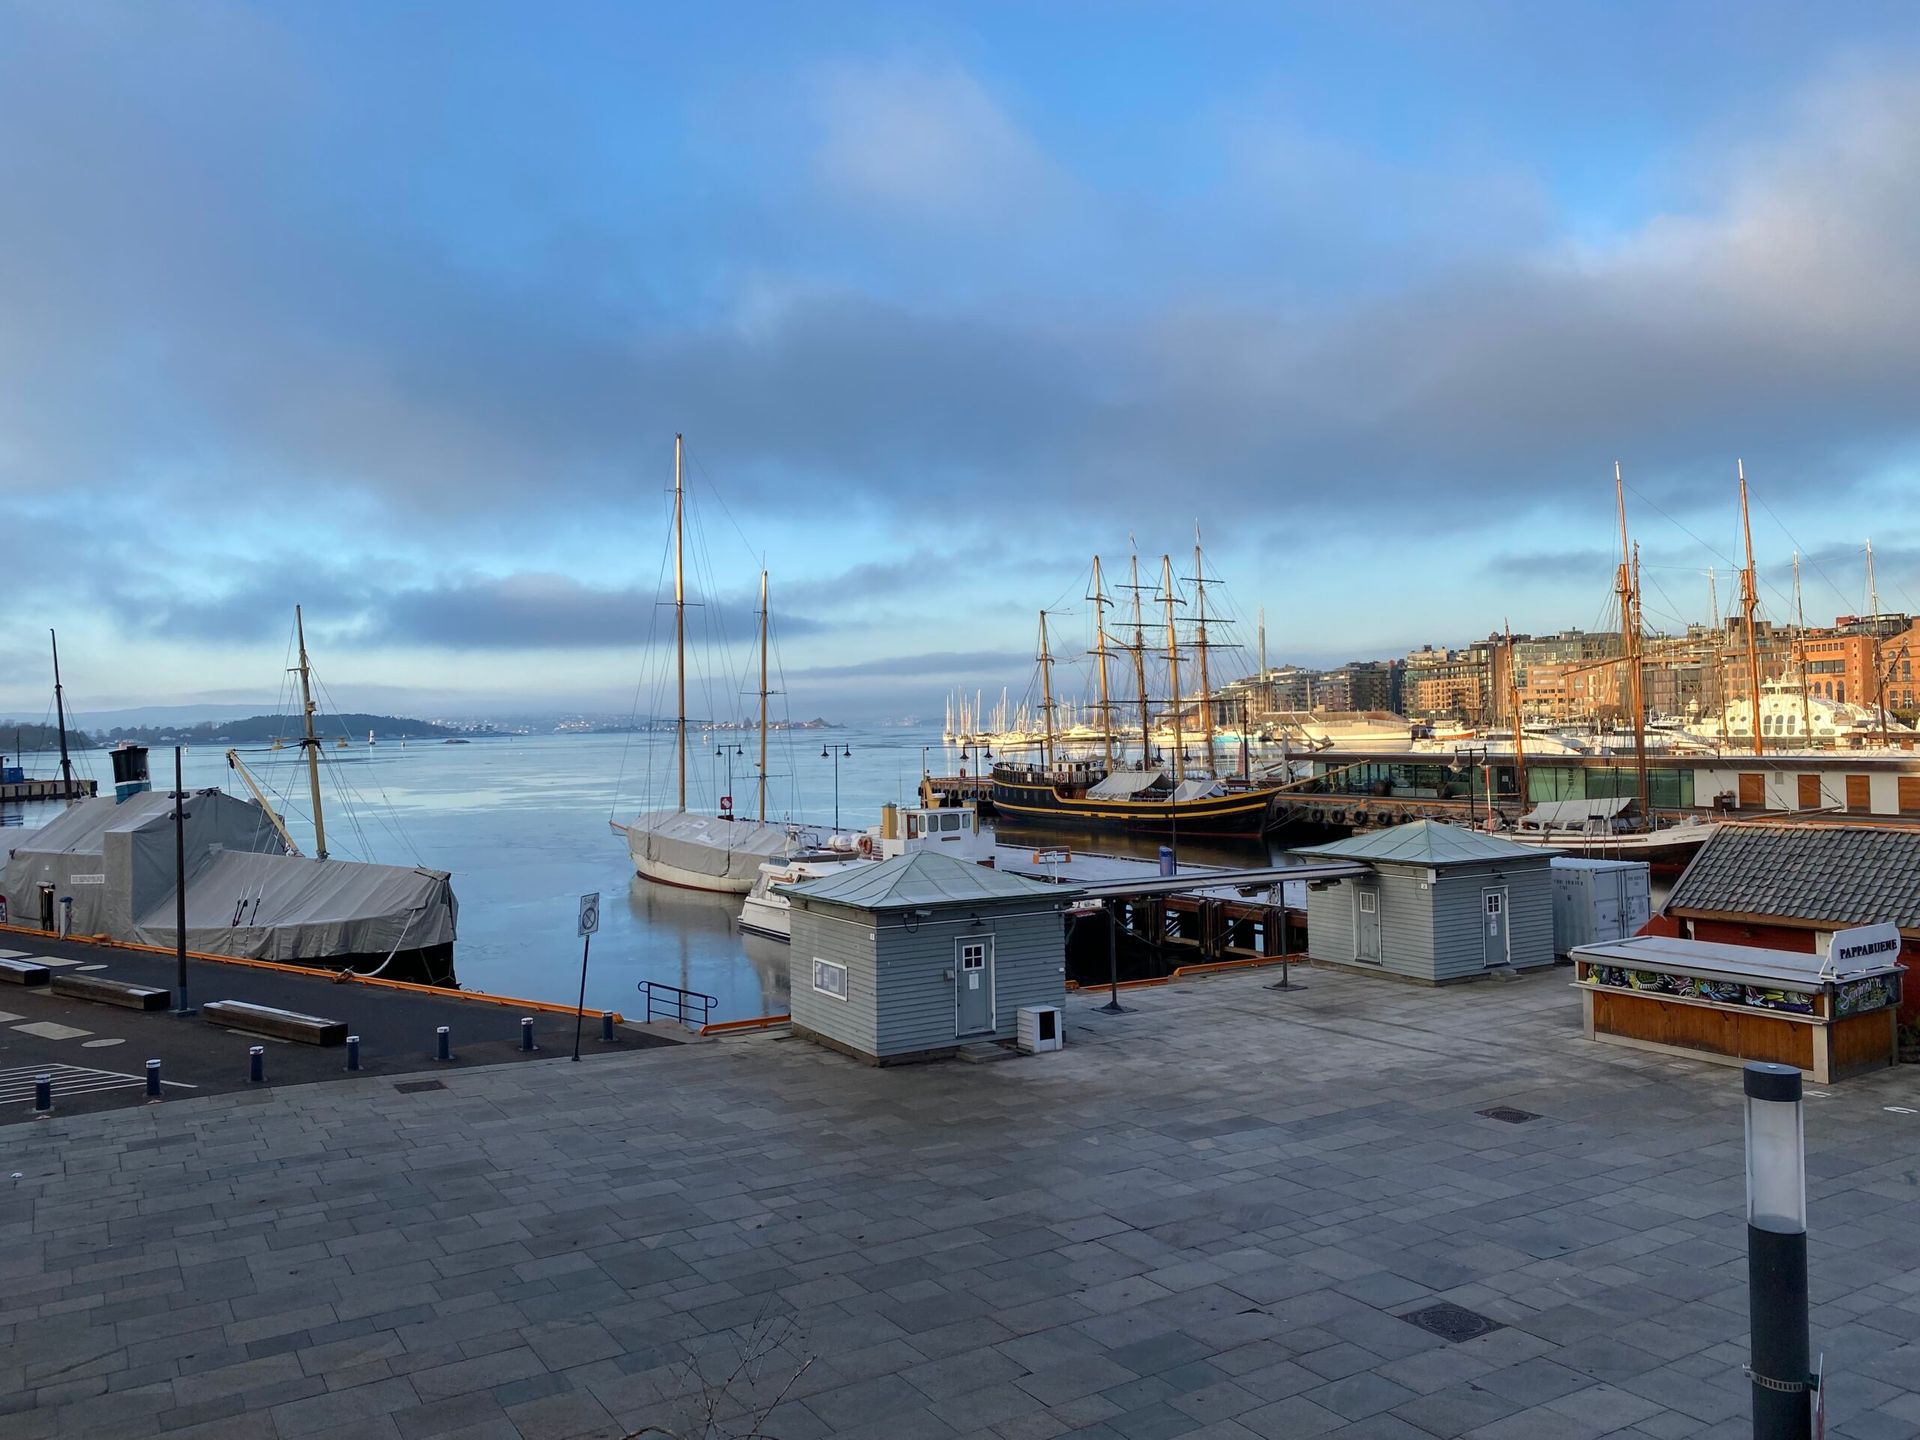 Aker Brygge in Oslo - a must-see while visiting Oslo